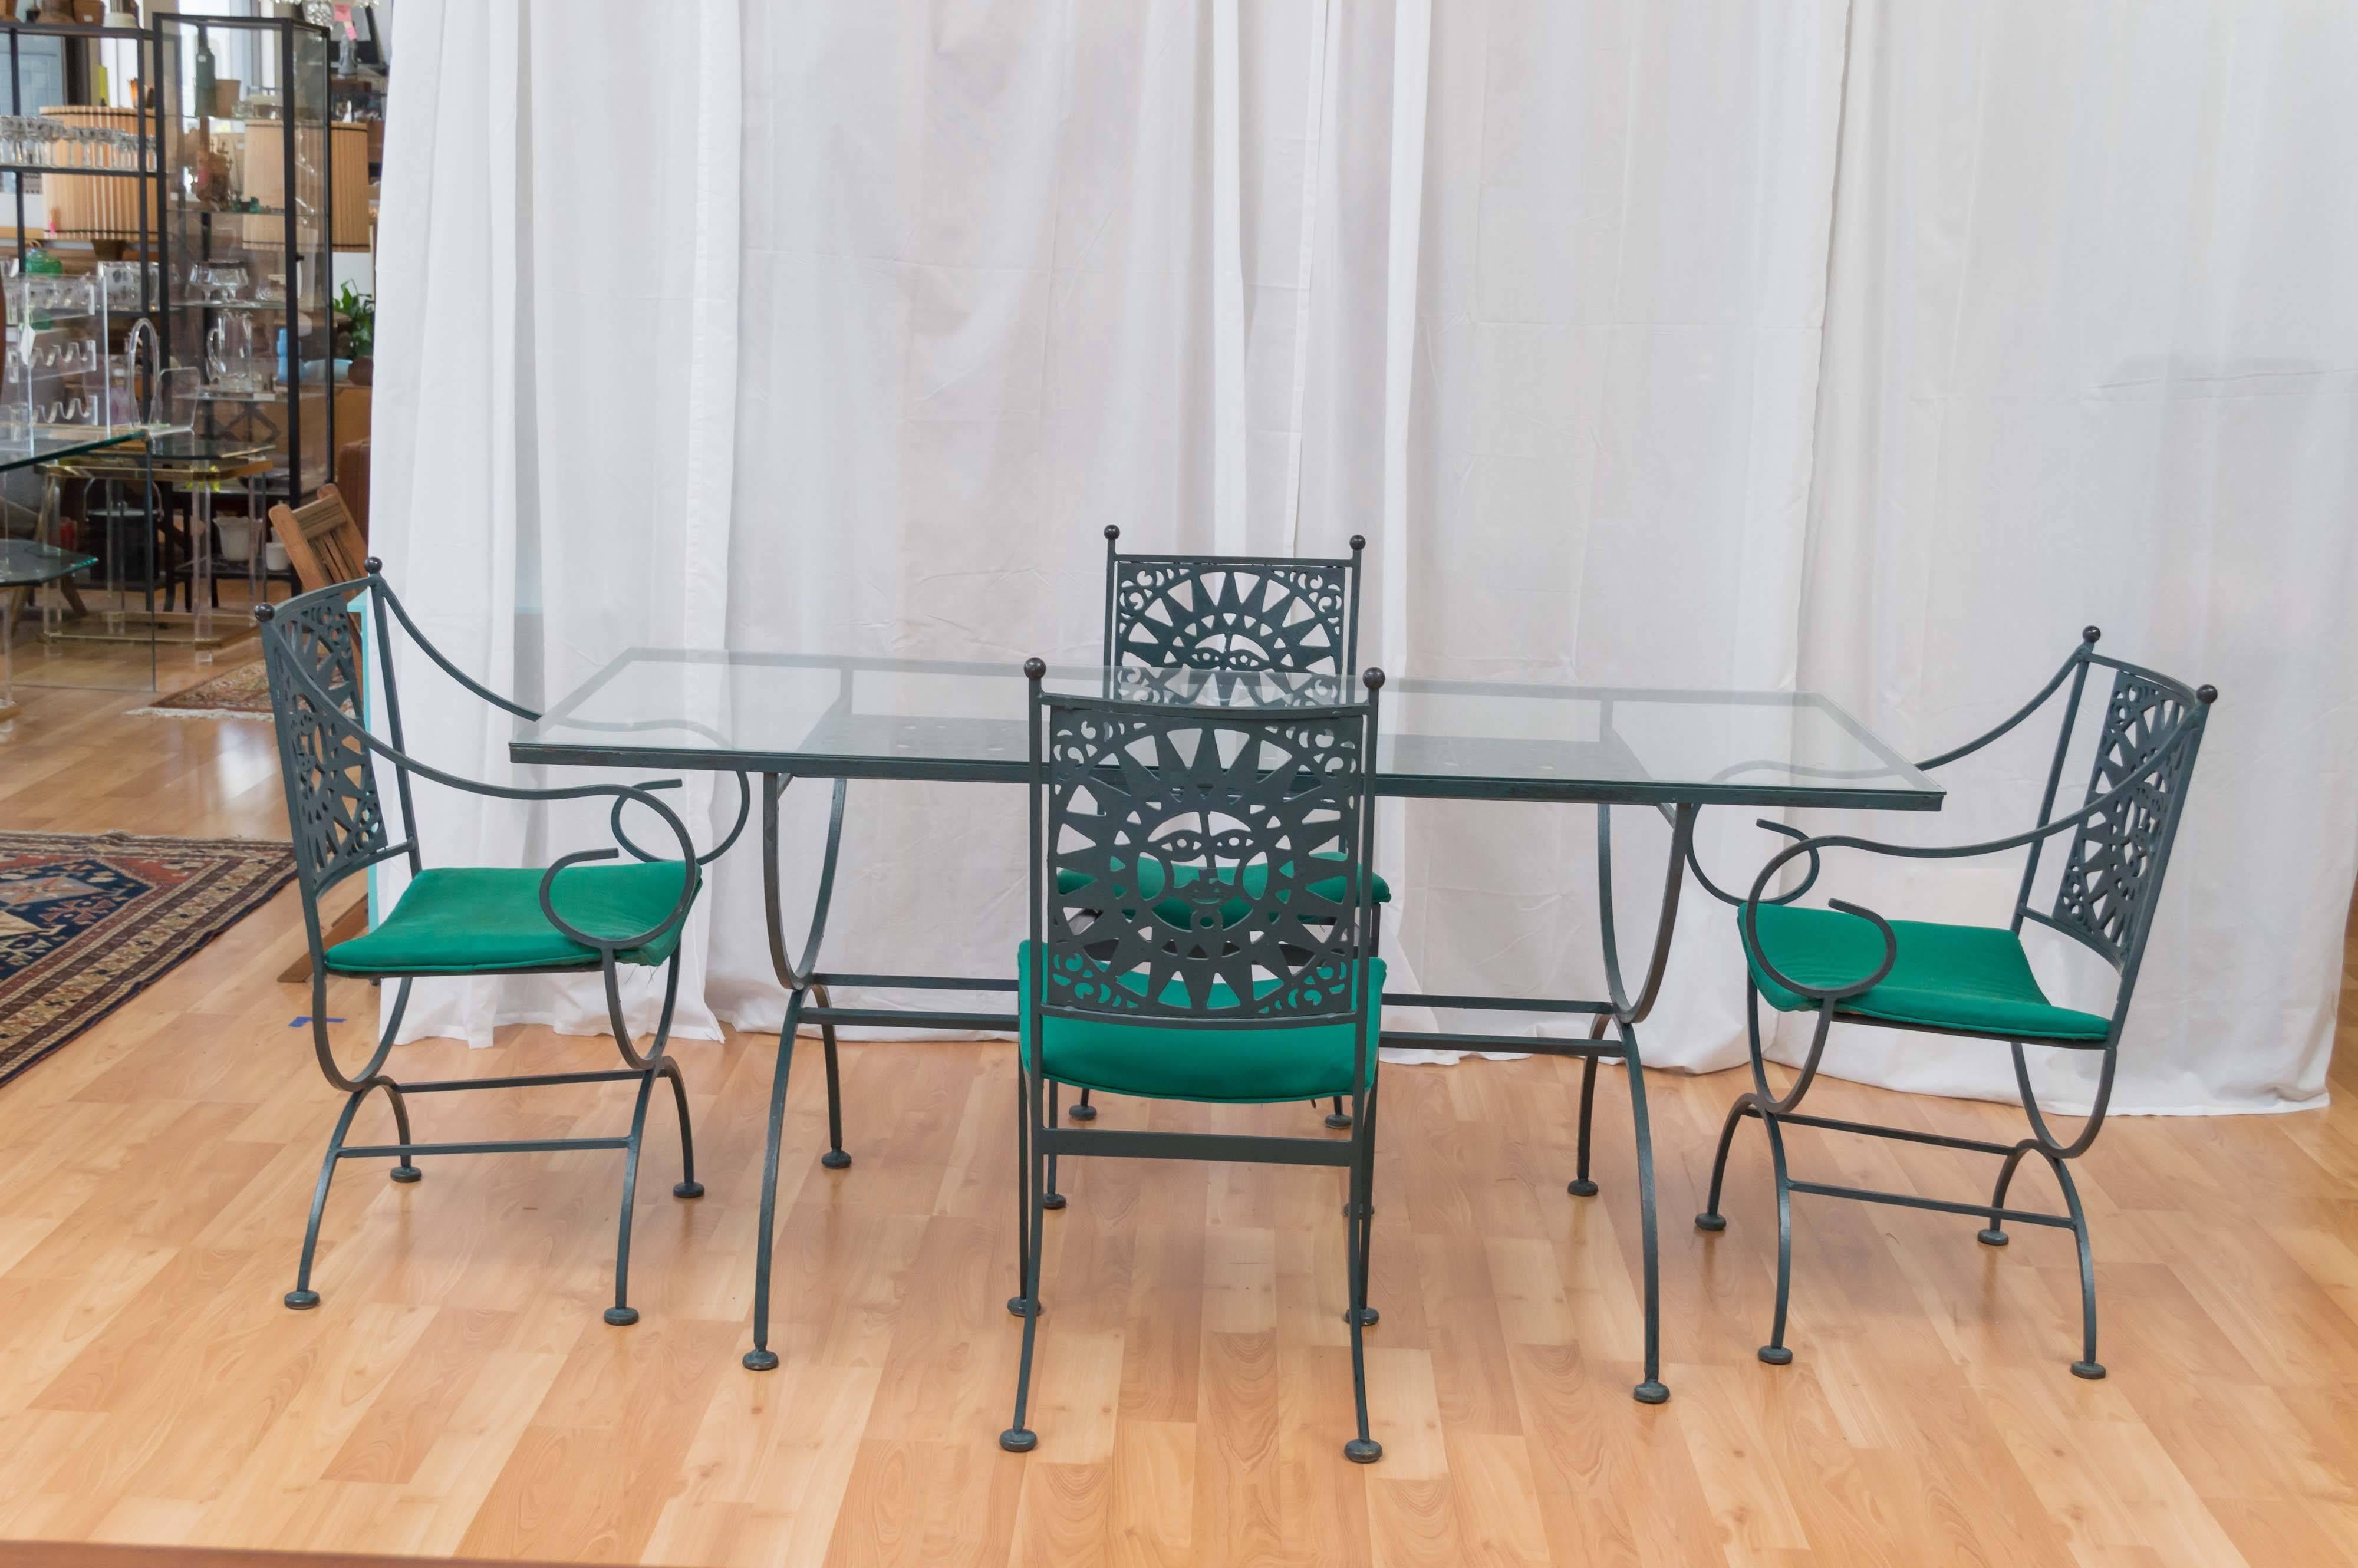 An enameled wrought iron five-piece dining or patio set from Arthur Umanoff’s rare “Mayan Collection” for Shaver-Howard.

This fanciful set includes a glass-topped table, two dining chairs, and two captains chairs. Pieces feature a whimsical